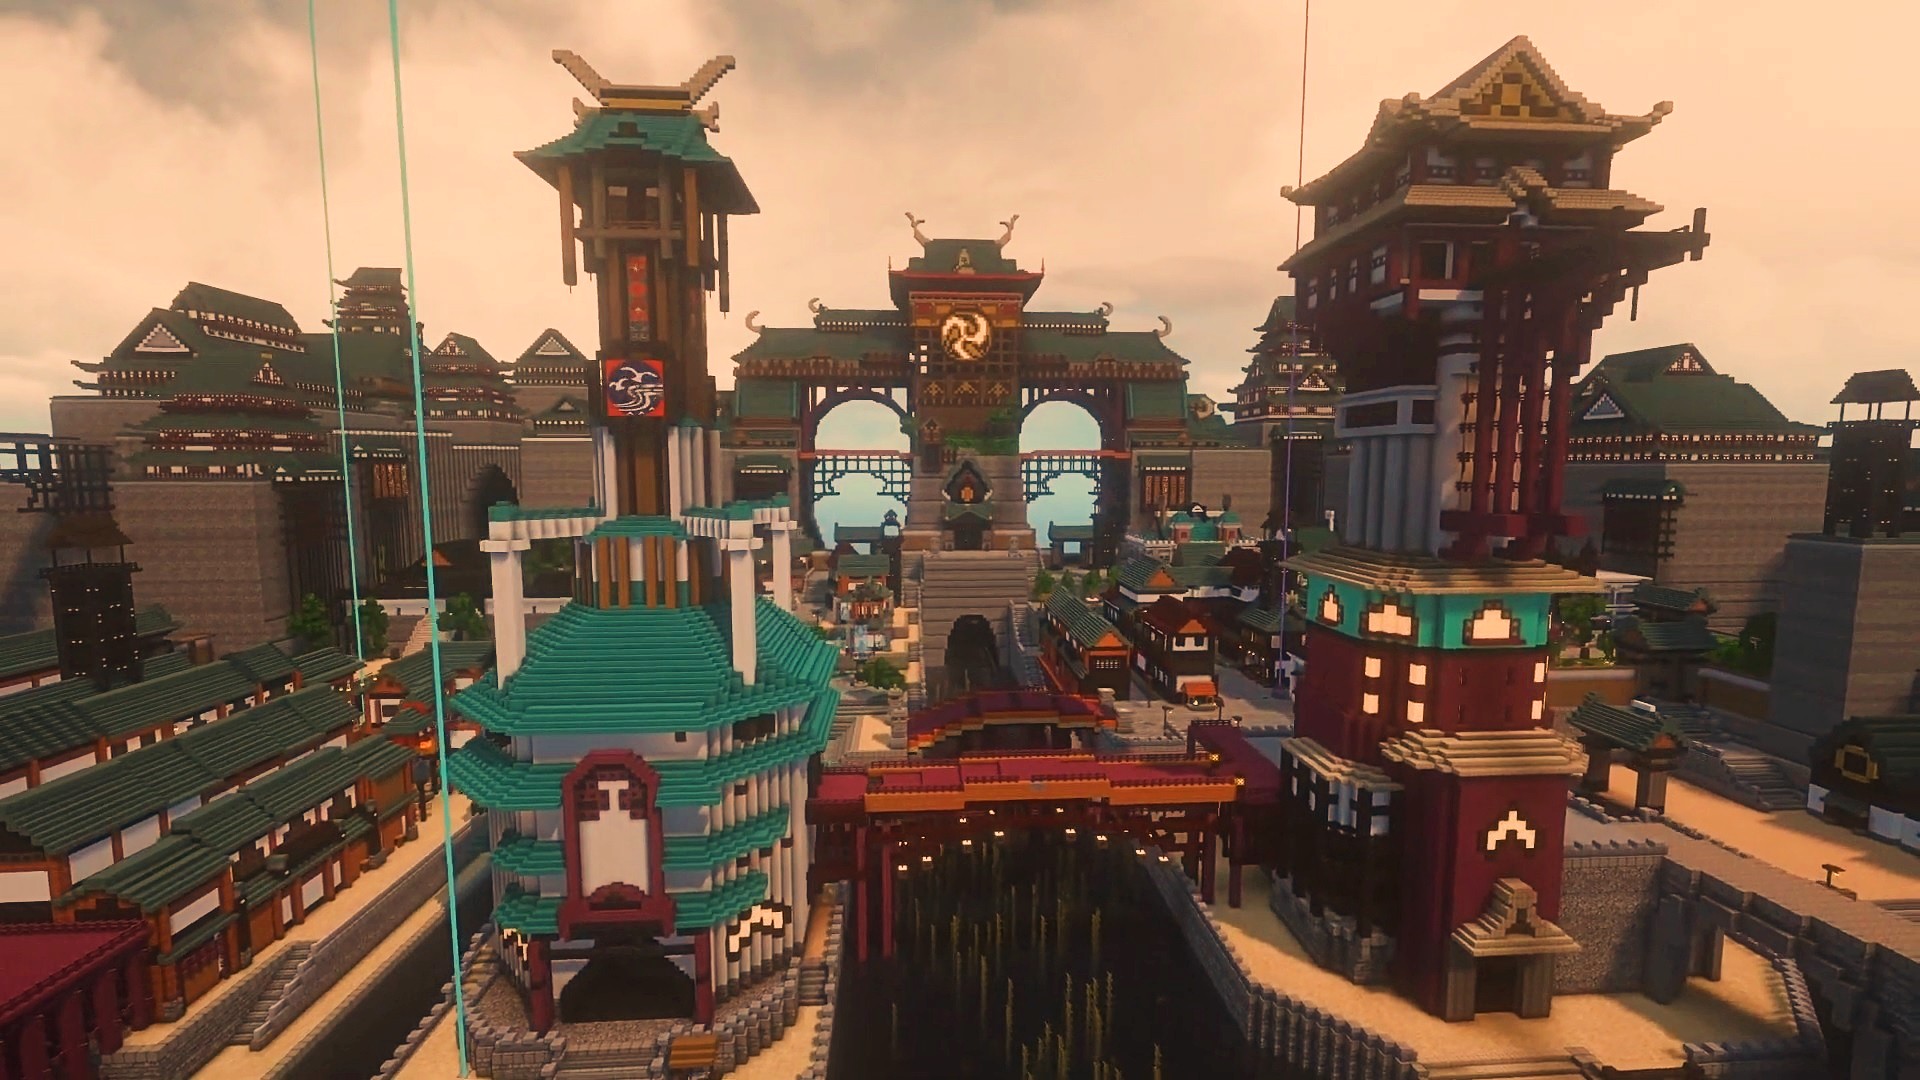 This Minecraft fan's recreation of FFXIV's Kugane is stunning